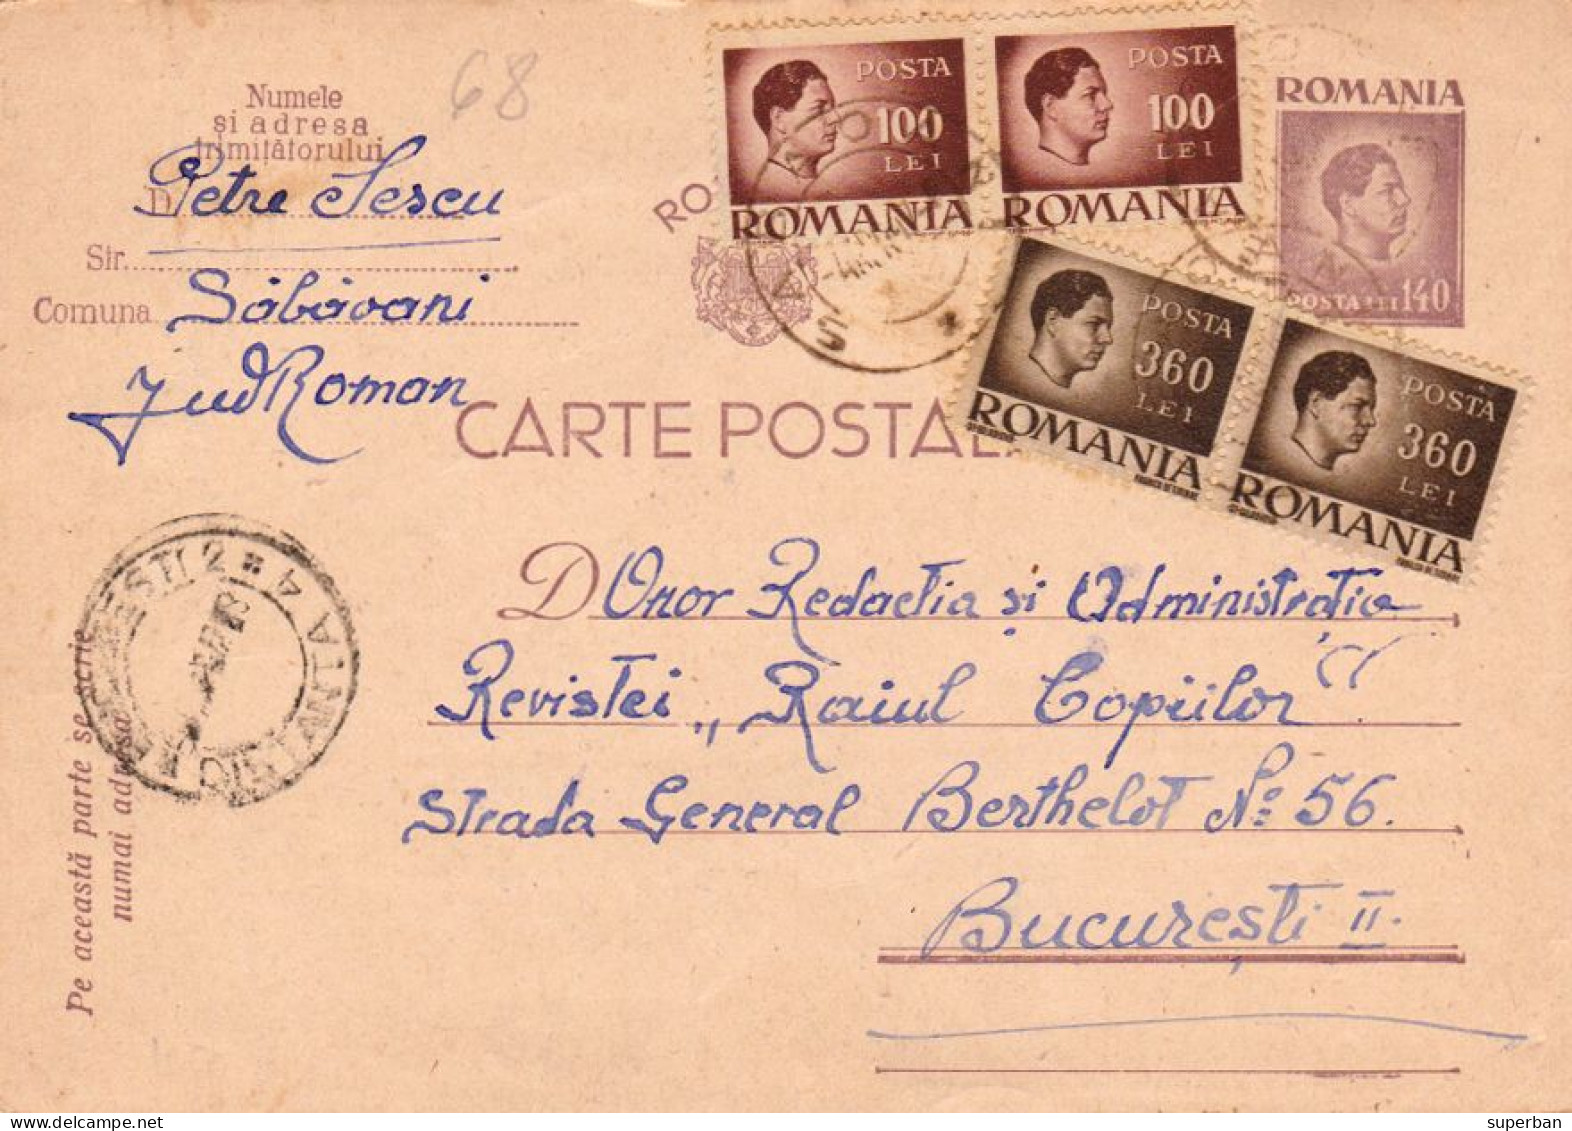 ROUMANIE / ROMANIA - INFLATION PERIOD : 1947 - STATIONERY POSTCARD With ADDED STAMPS - RATE : 1,060 LEI (an741) - Brieven En Documenten